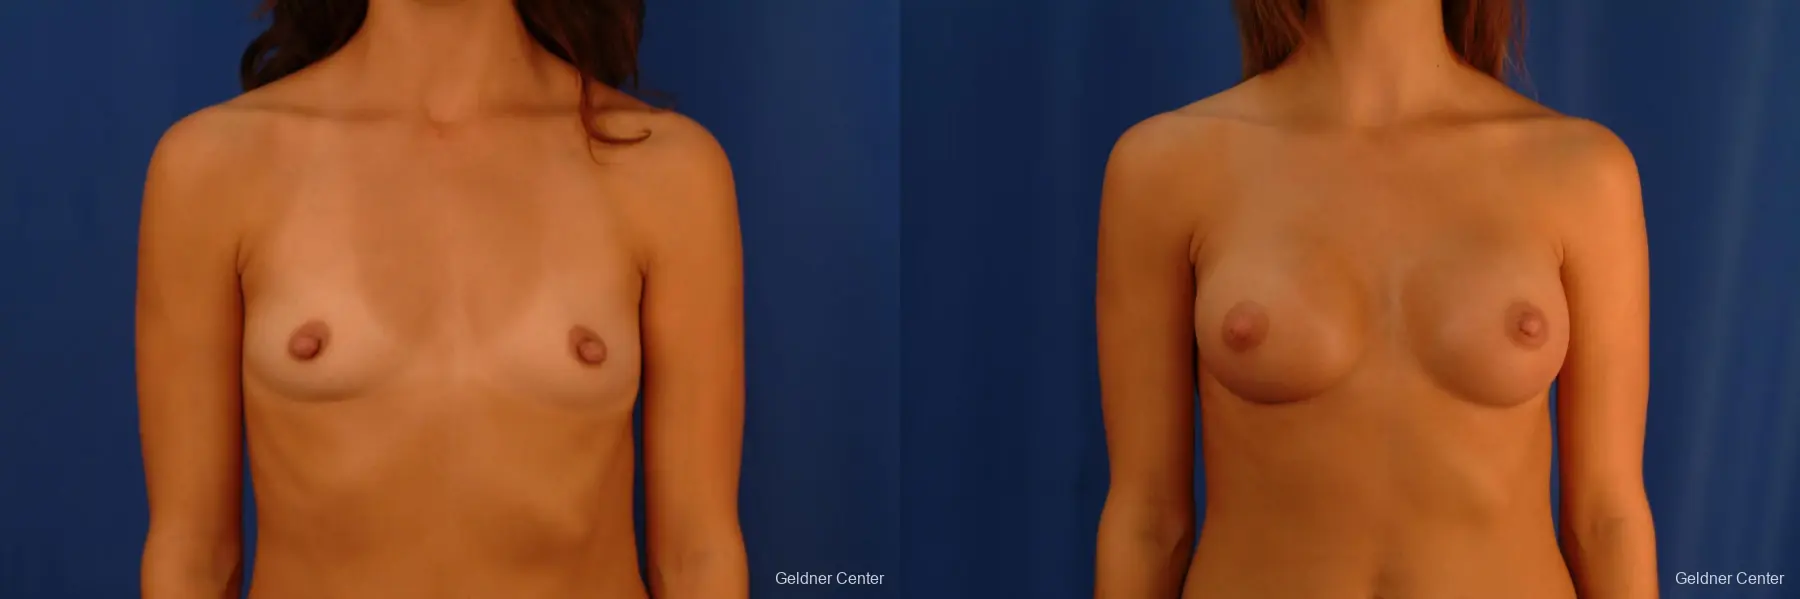 Breast Augmentation Hinsdale, Chicago 2412 - Before and After 1